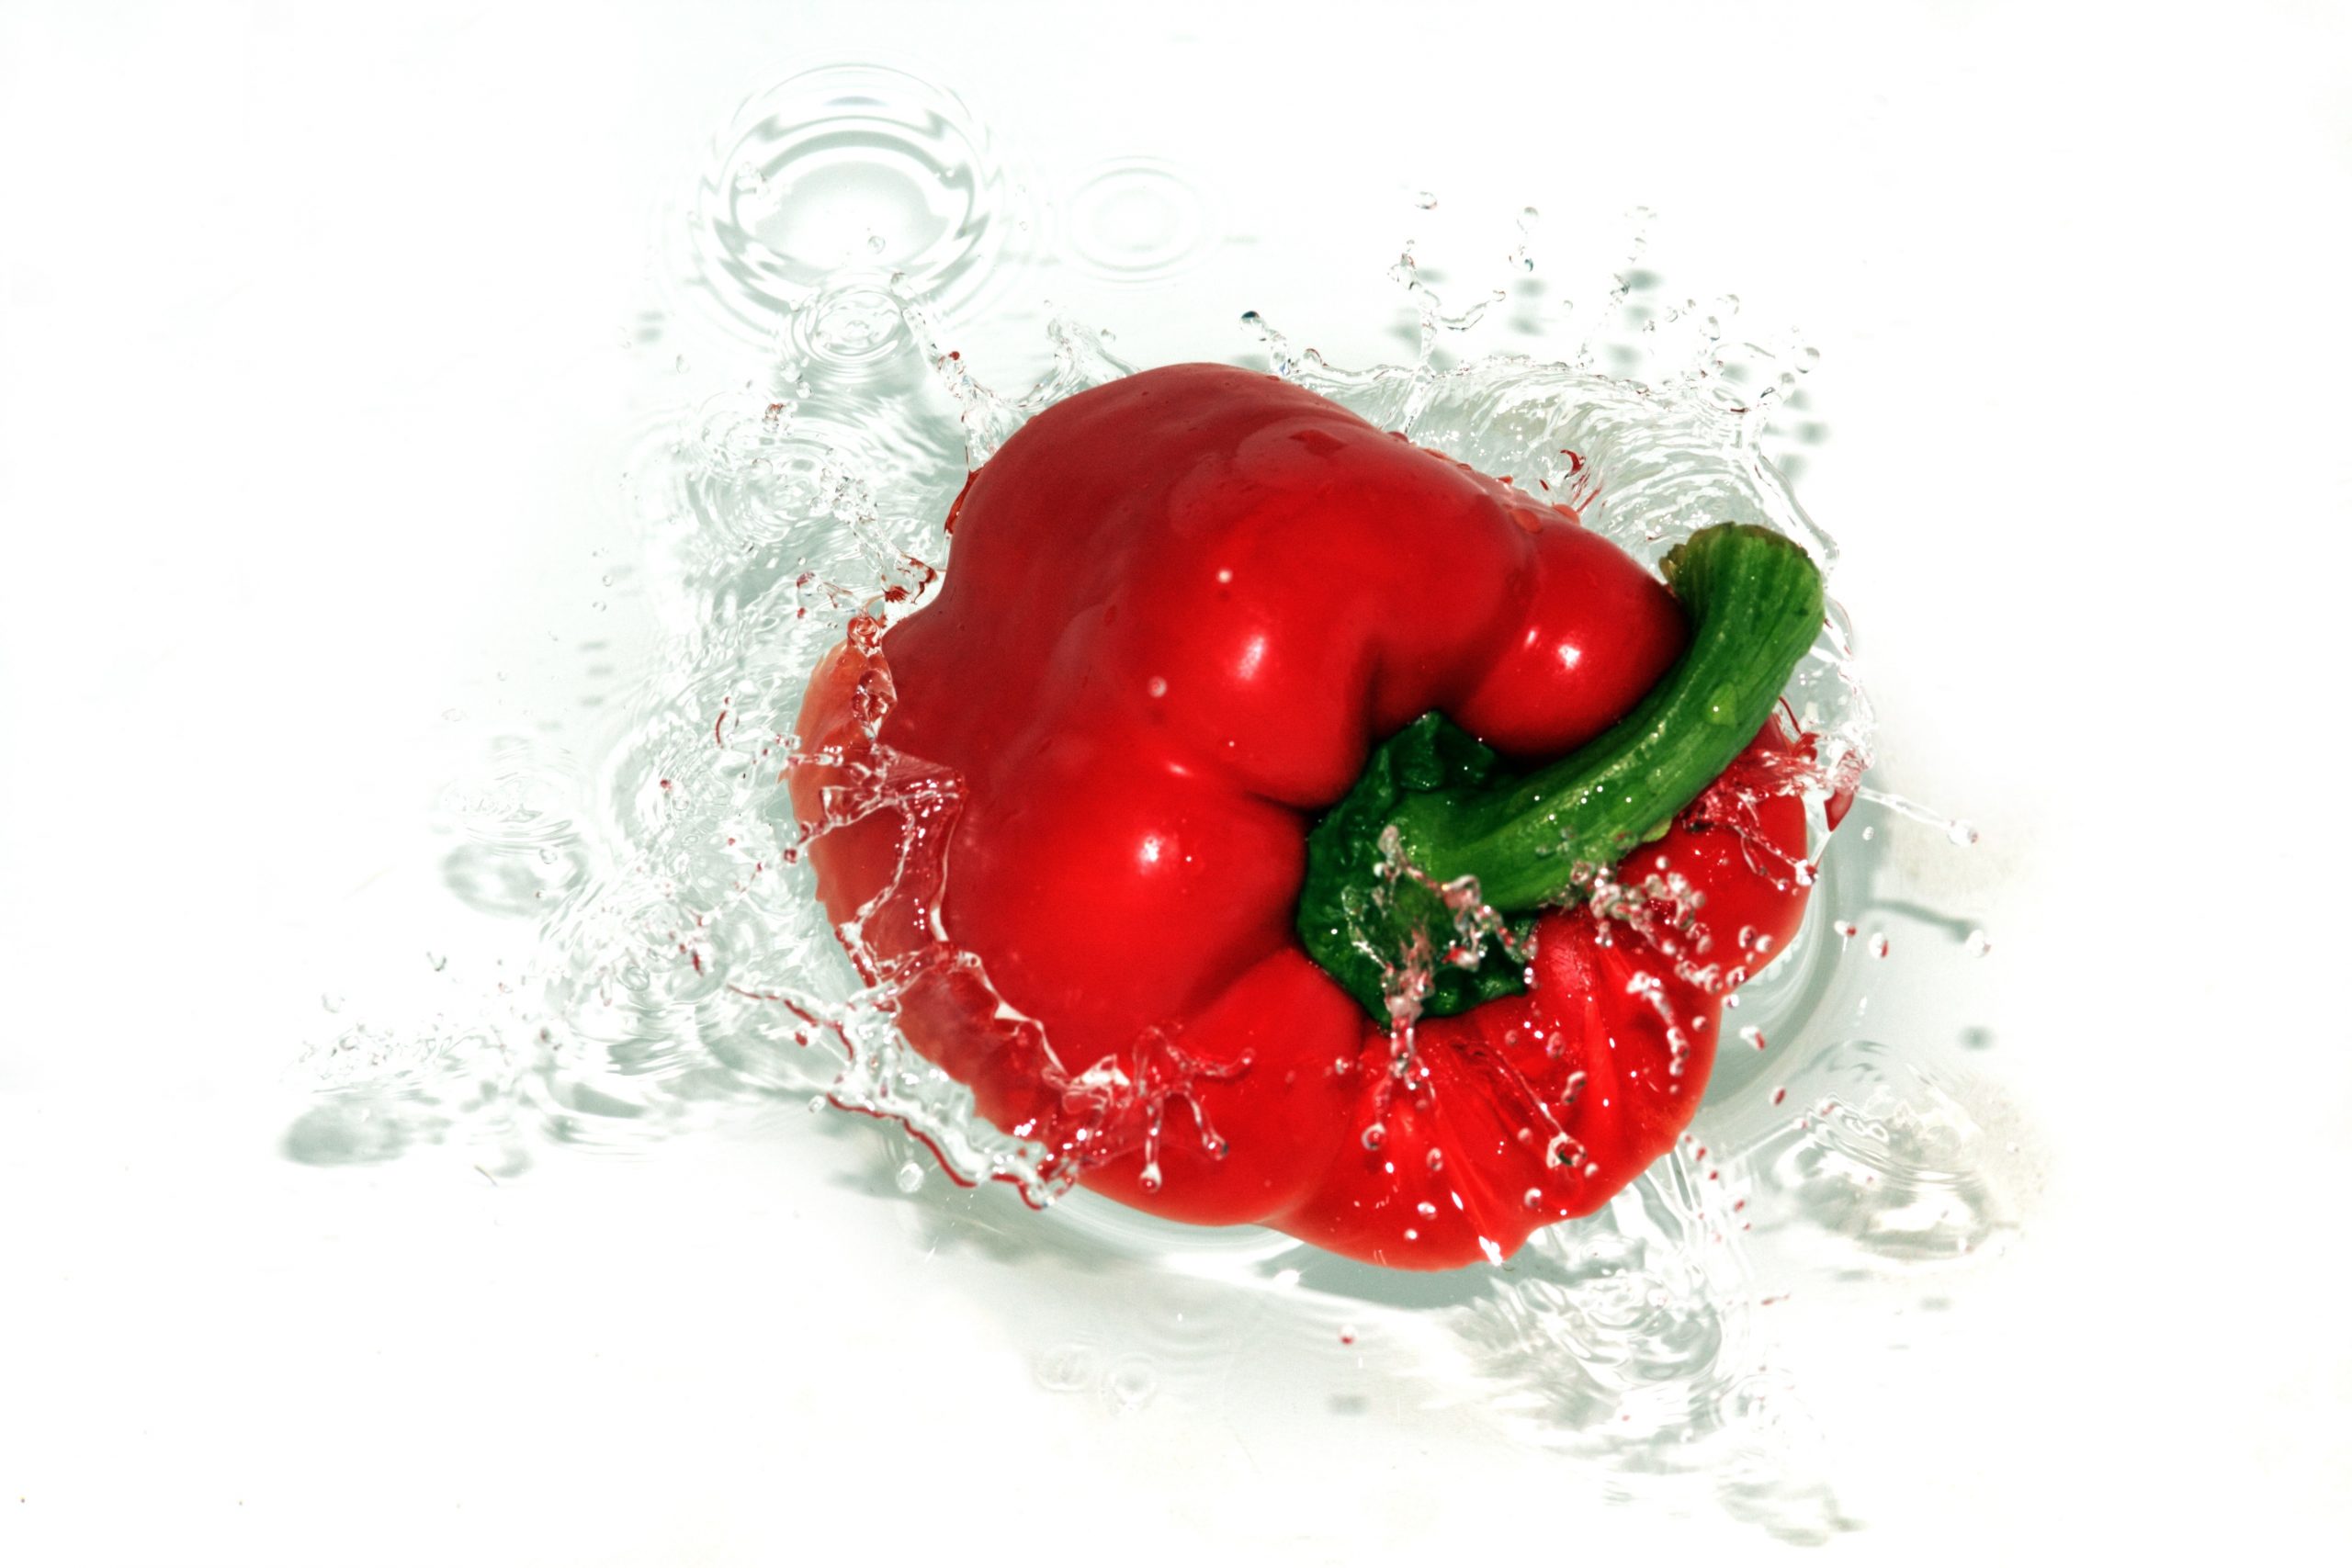 Red Pepper good source of vitamin C